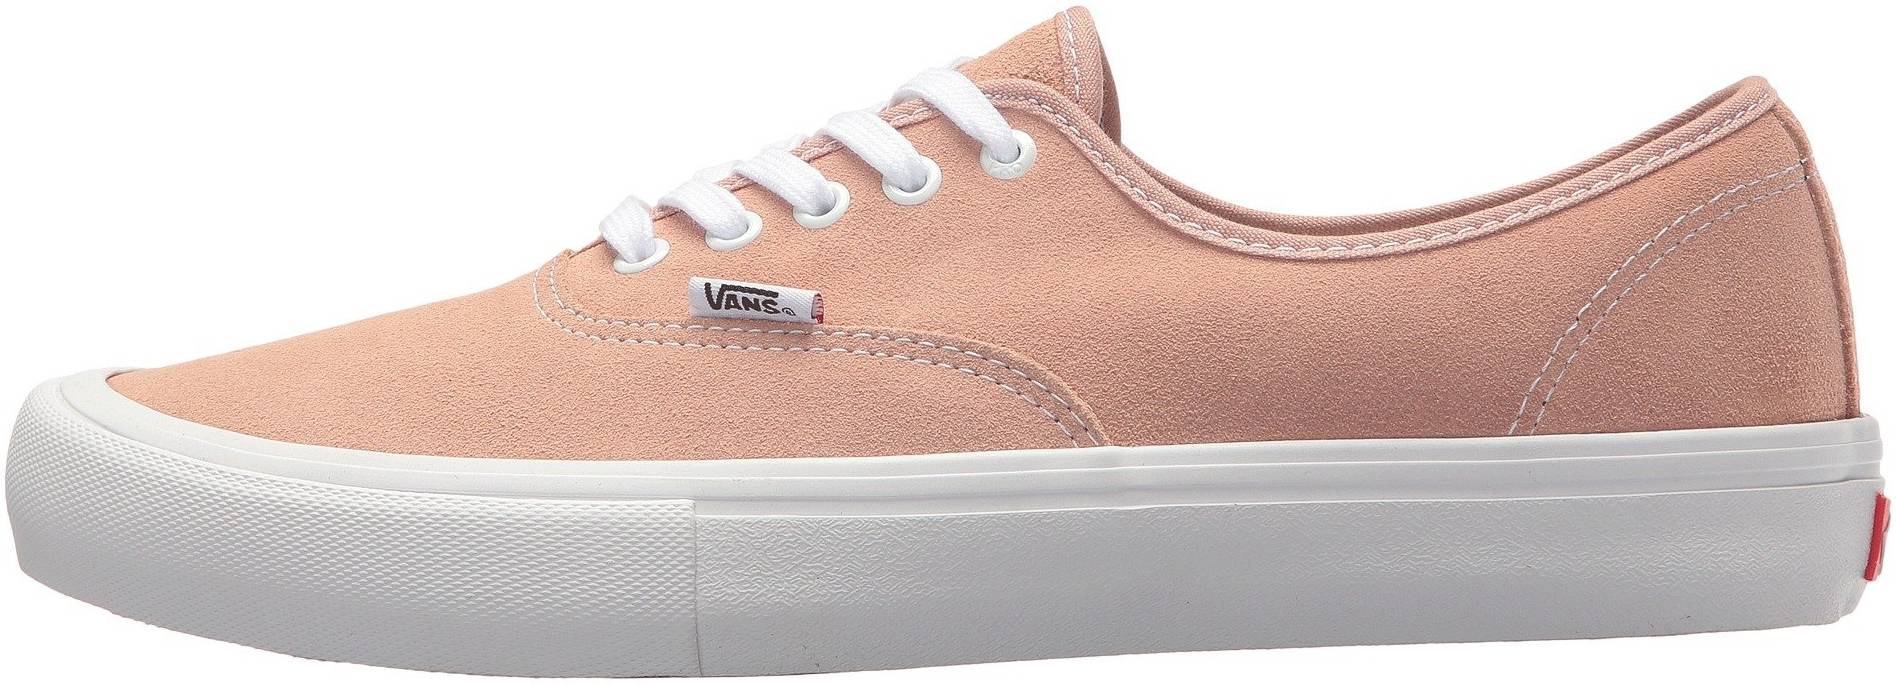 Vans cheap sneakers: Save up to 40% | RunRepeat